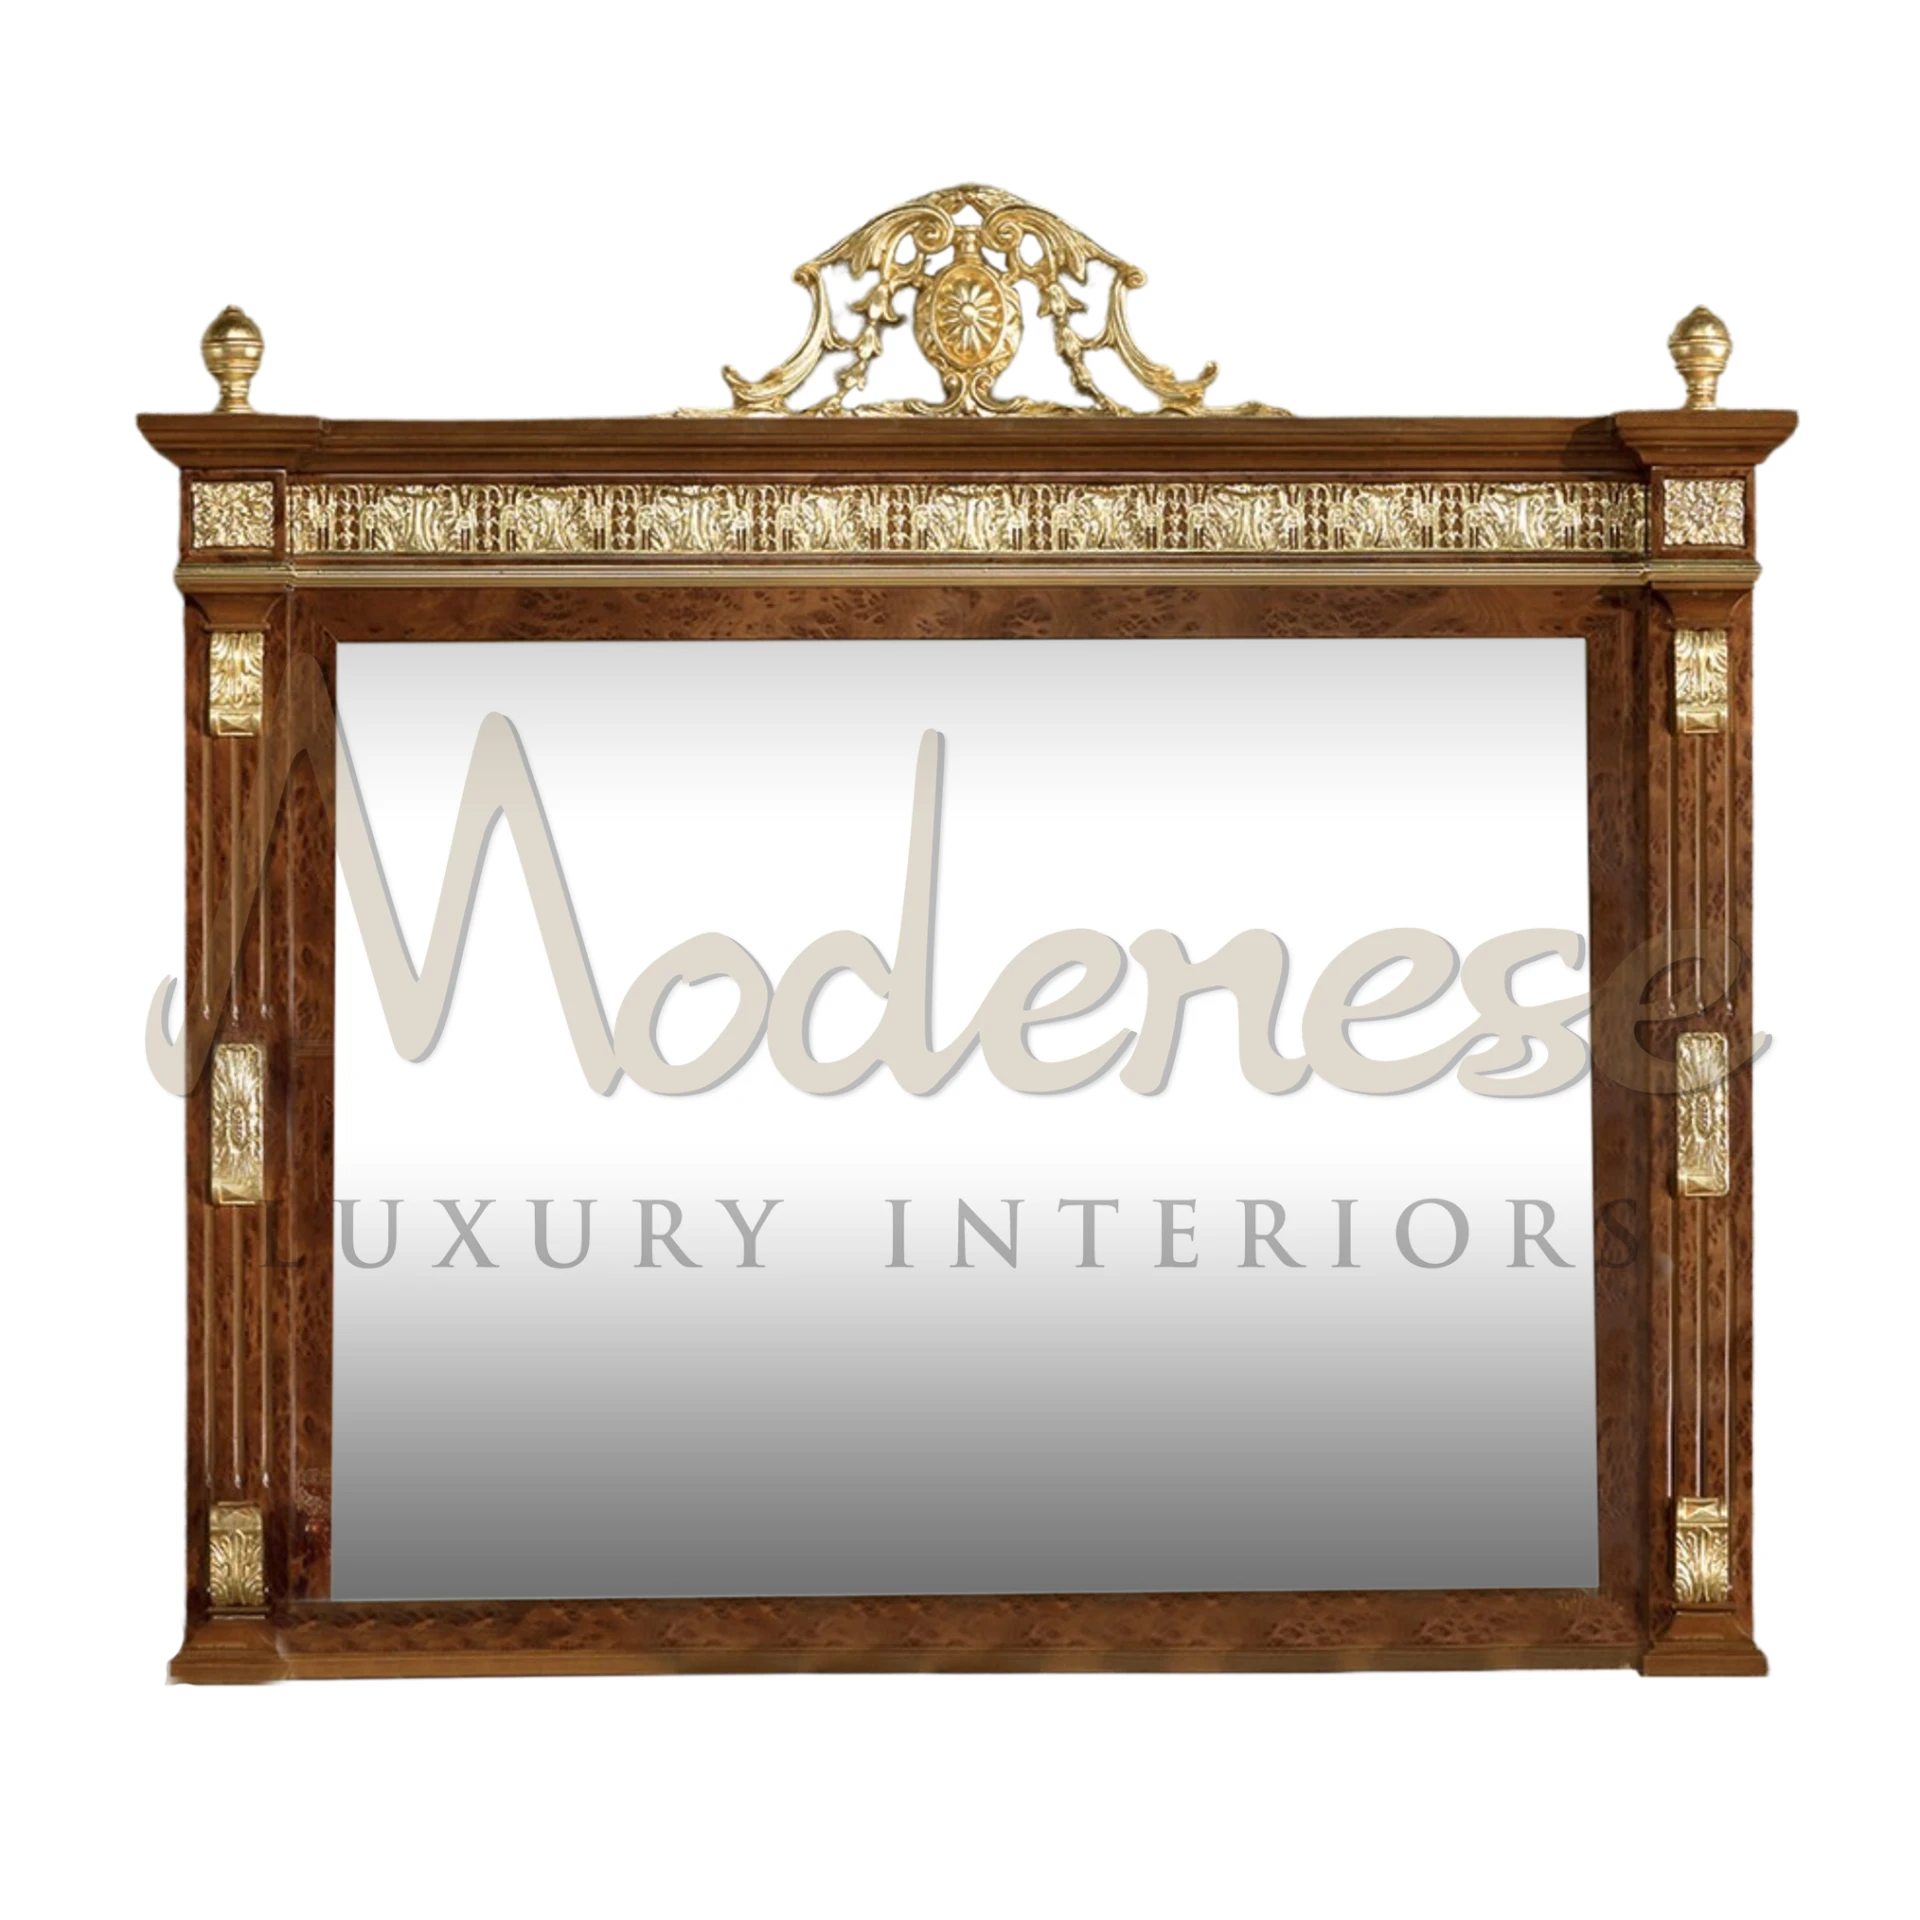 Benedict Handmade Classic Wall Mirror, tailored in Italy, offers luxury and elegance in solid wood for a timeless home decor piece.